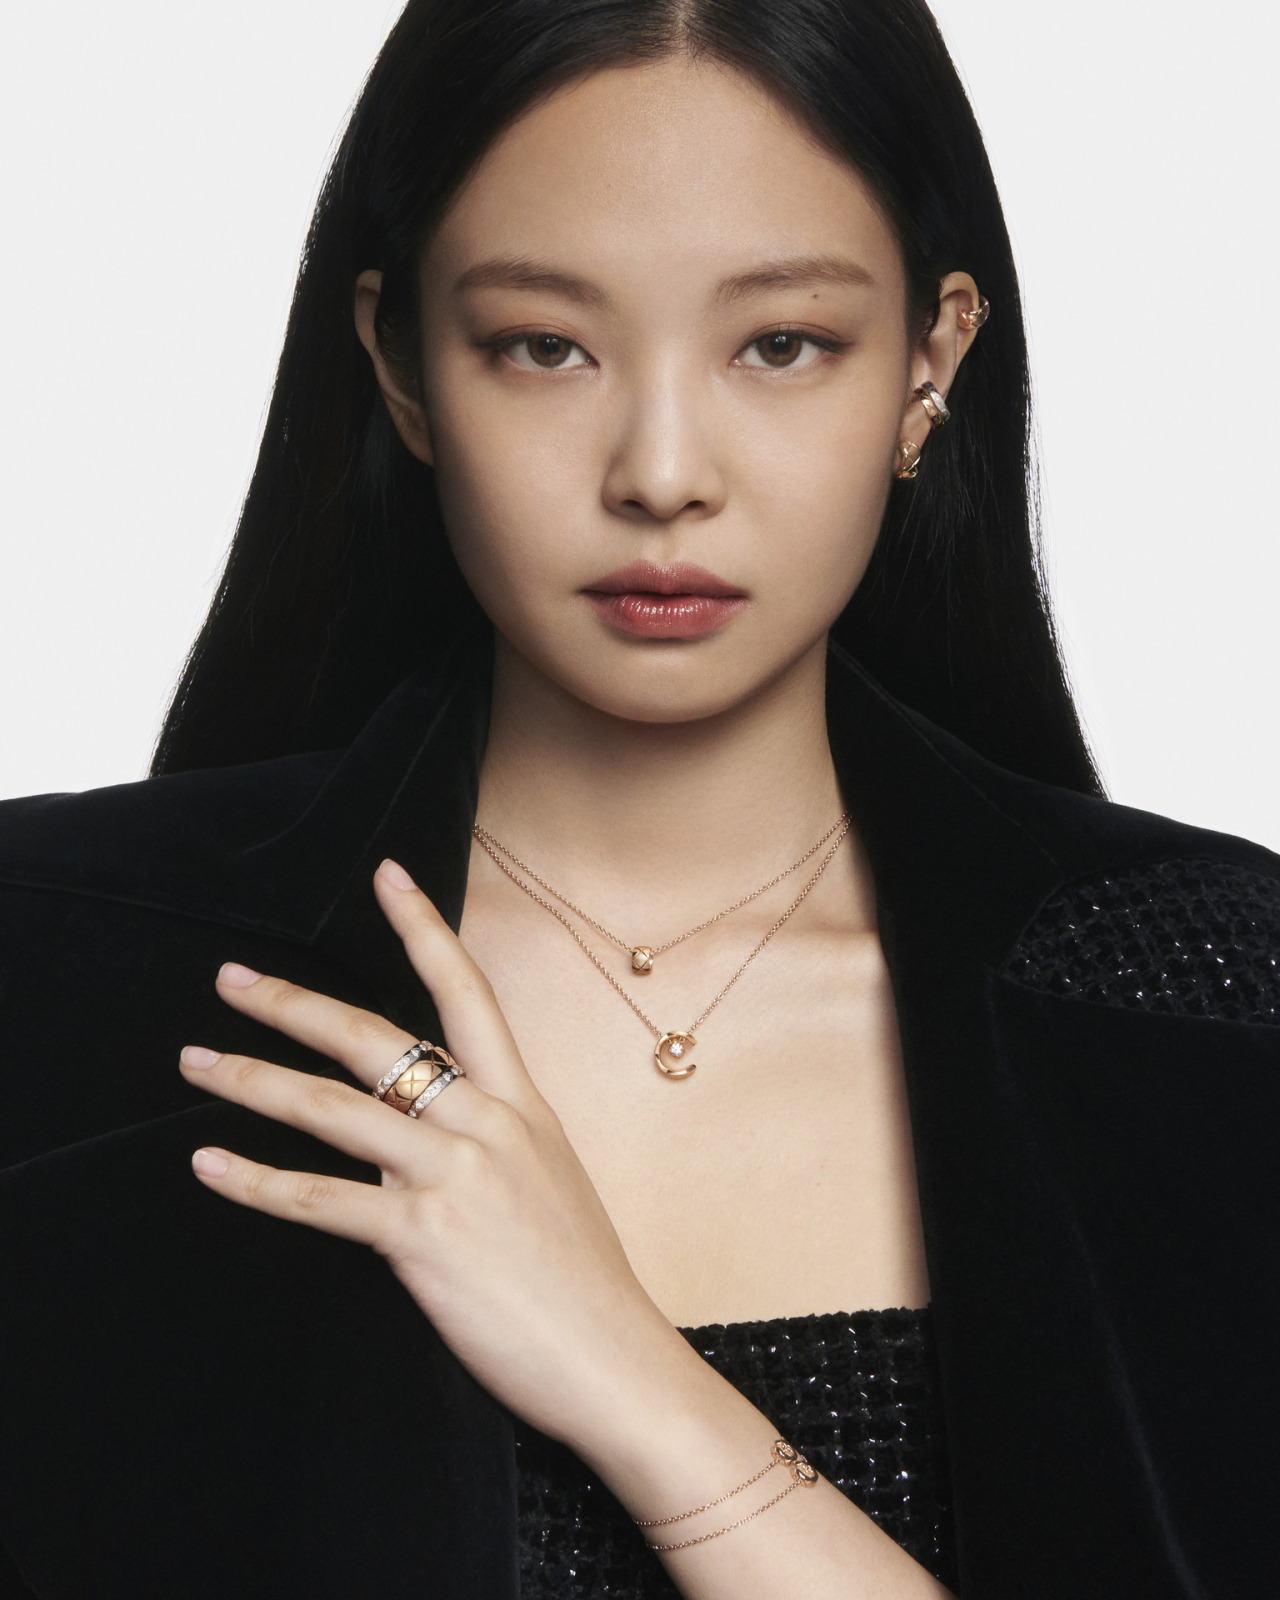 NewJeans' Minji is the new face of luxury brand Chanel